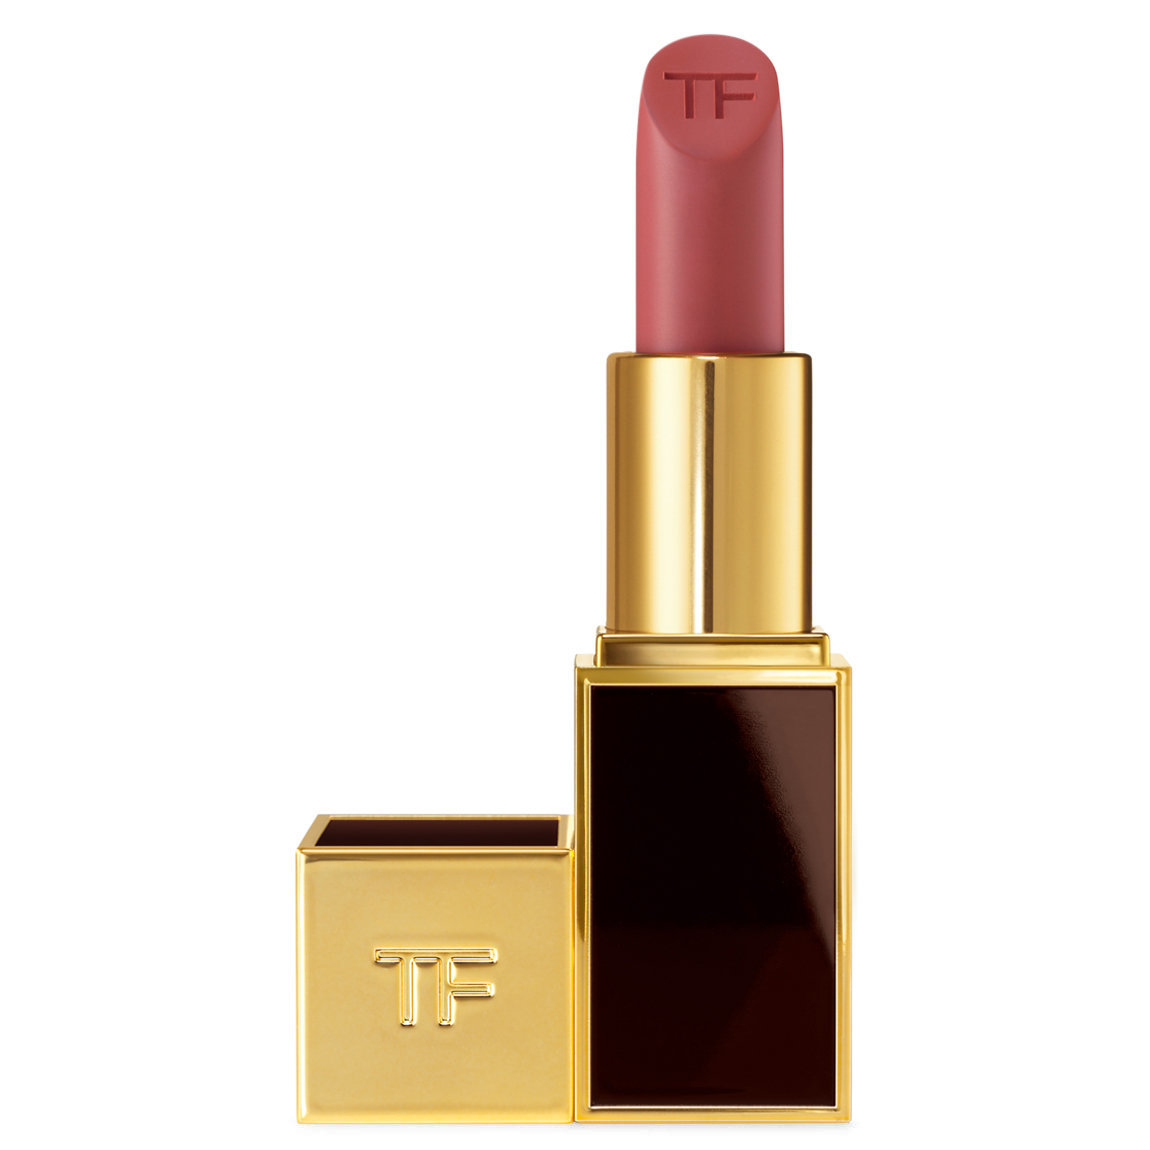 TOM FORD Lip Color Blazing Kiss alternative view 1 - product swatch.